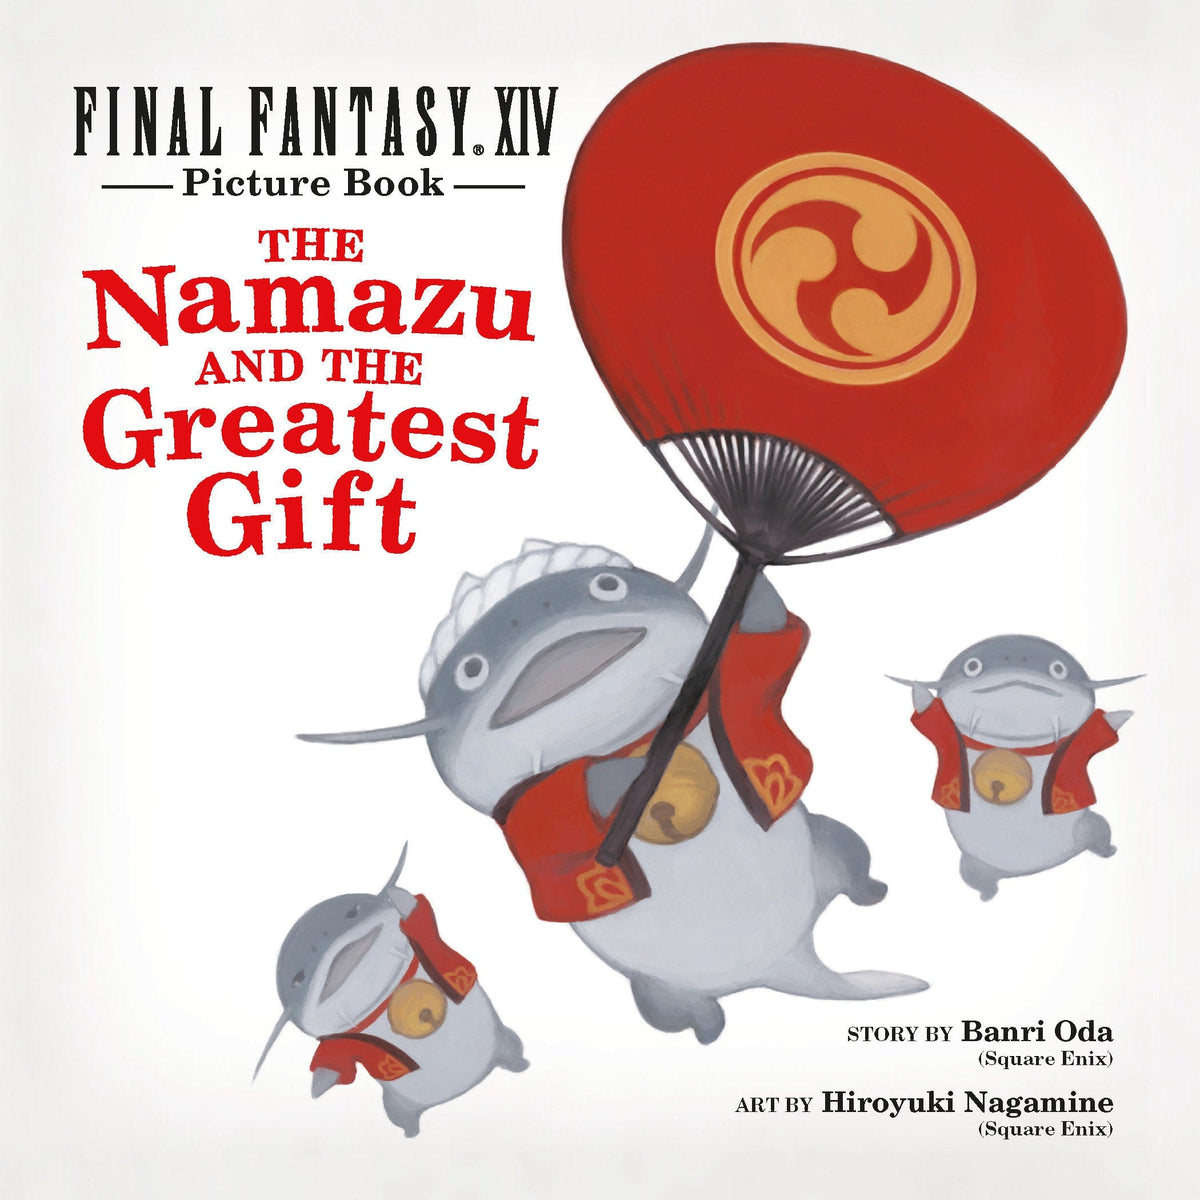 Final Fantasy Xiv Picture Book: The Namazu and the Greatest Gift - Third Eye